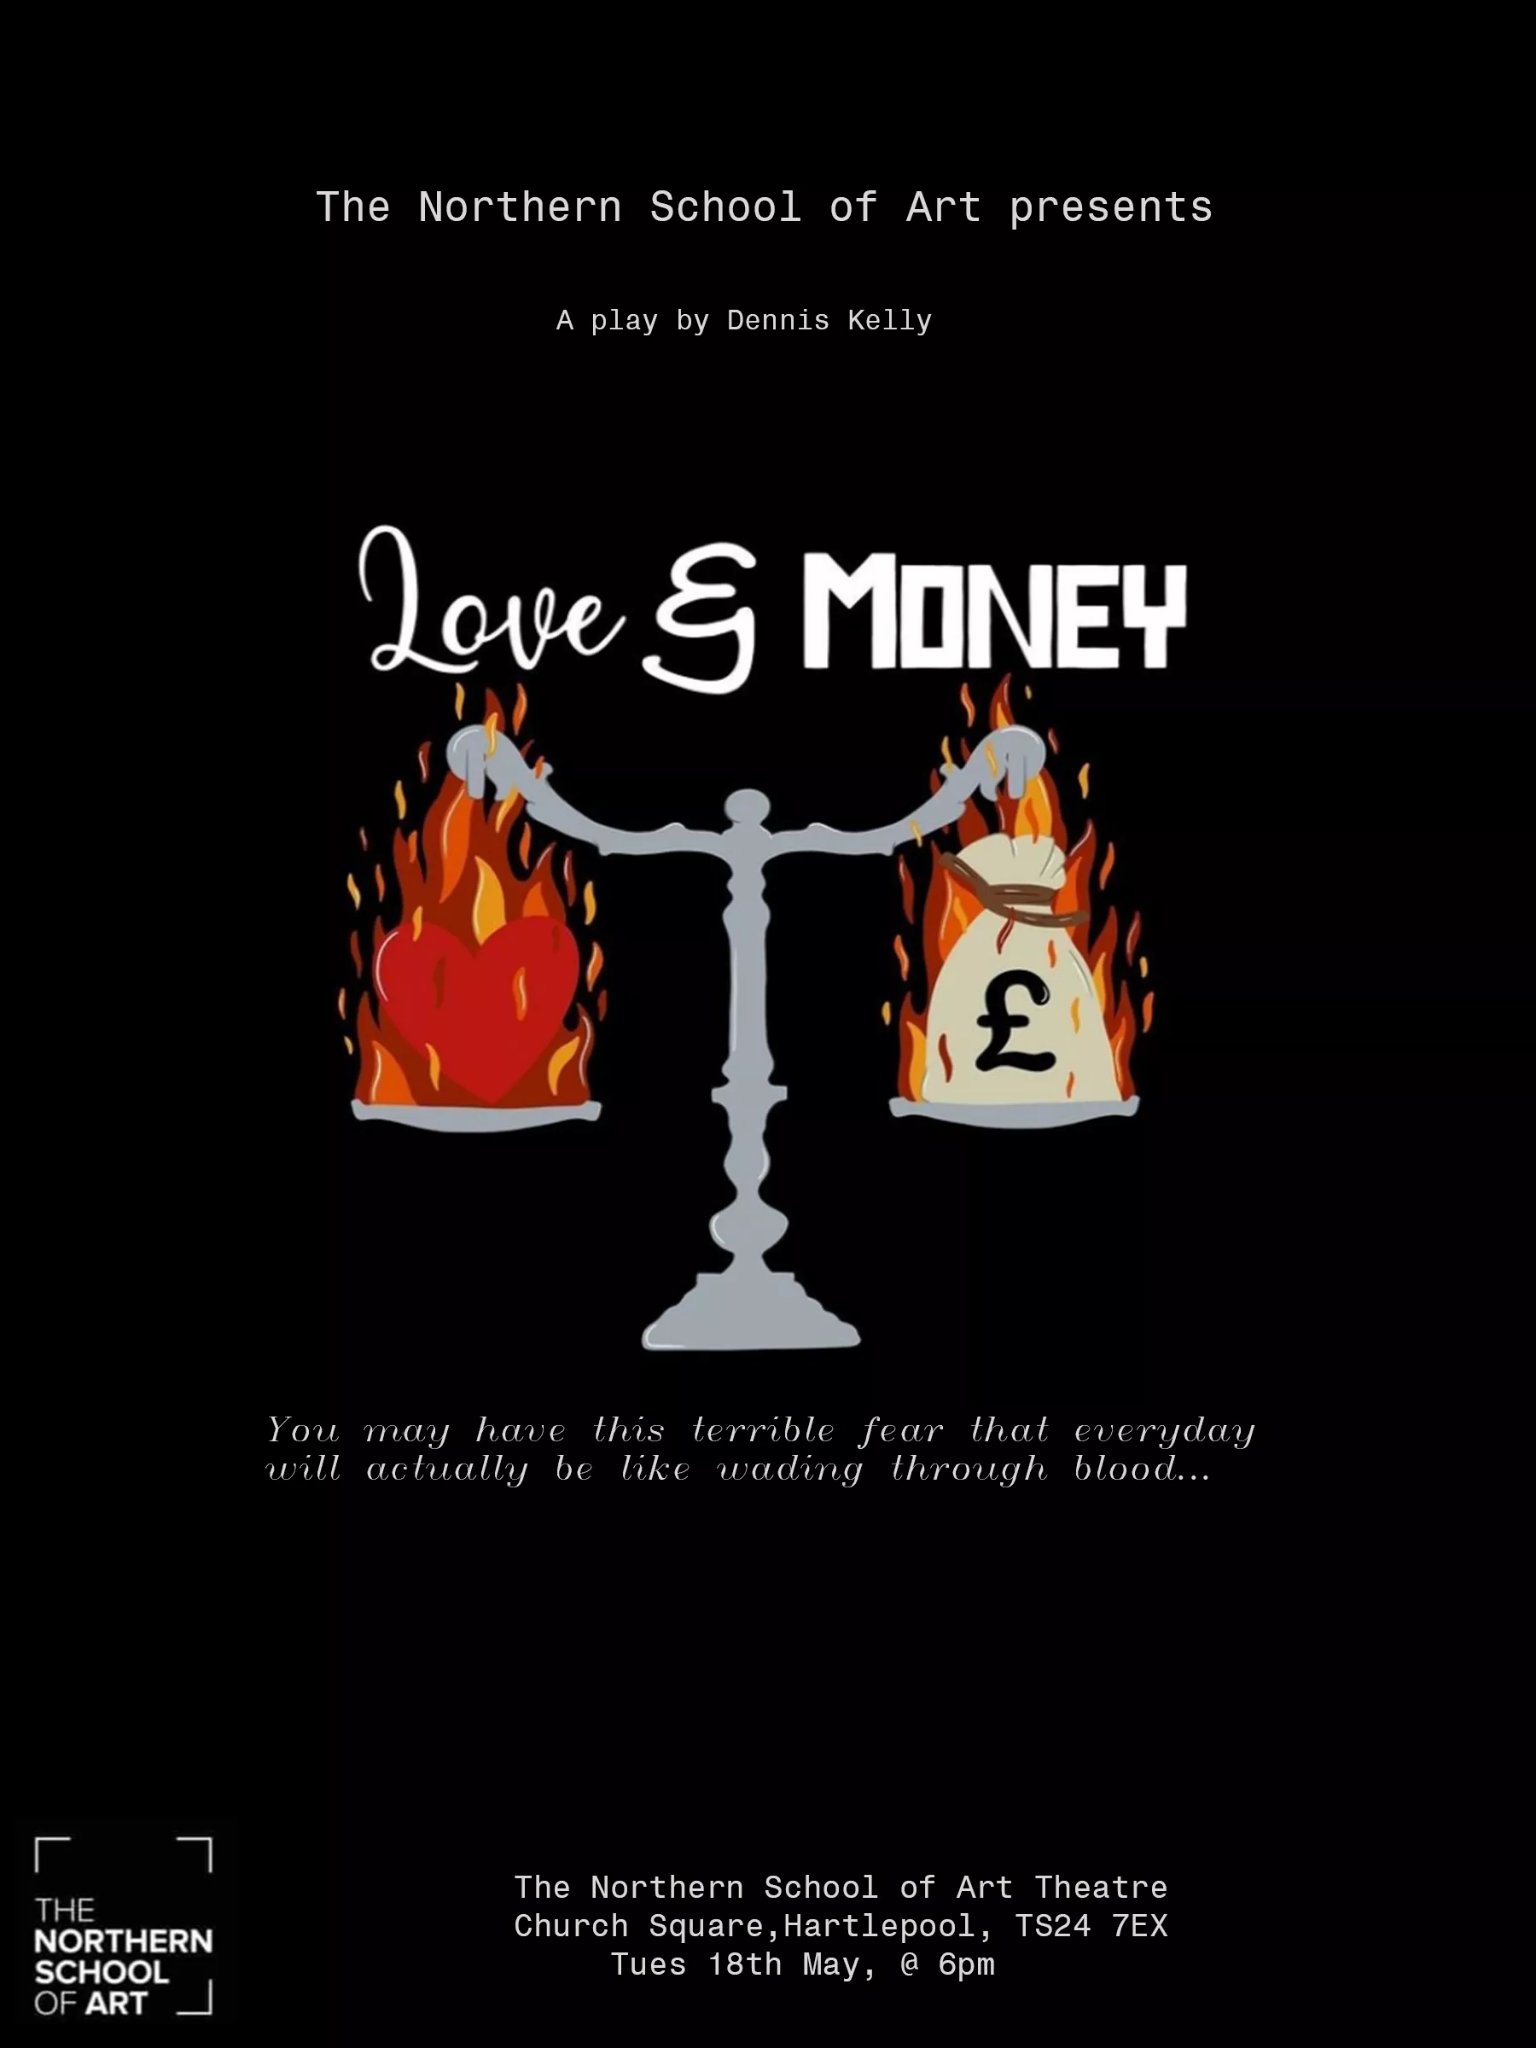 Love and money dennis kelly monologue